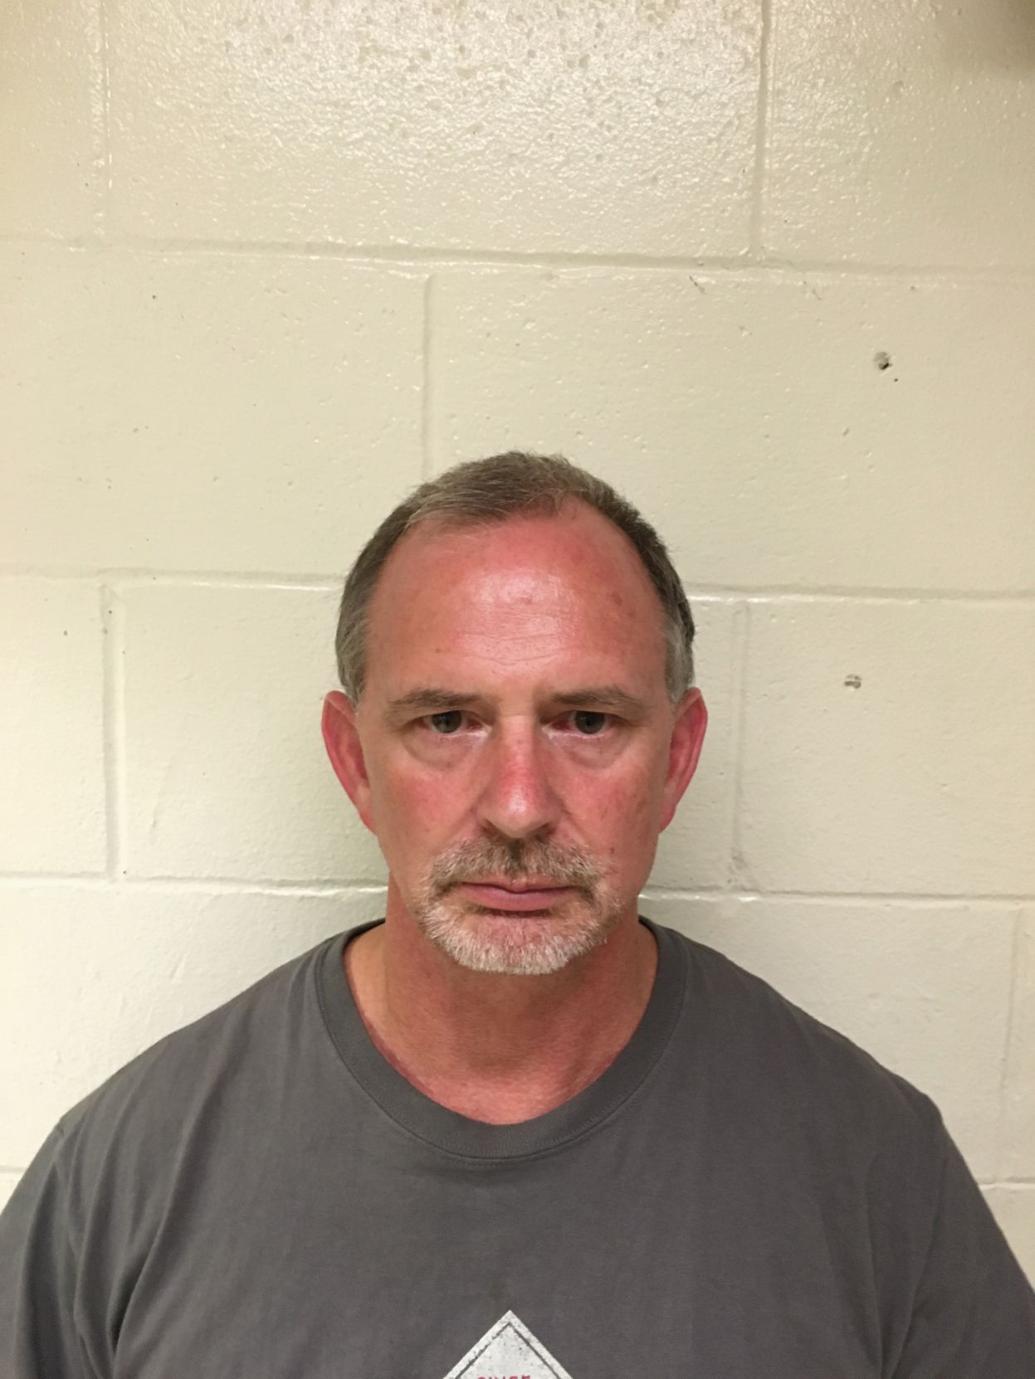 Massage Therapist Arrested On Second Sexual Assault Charge Local News 2879